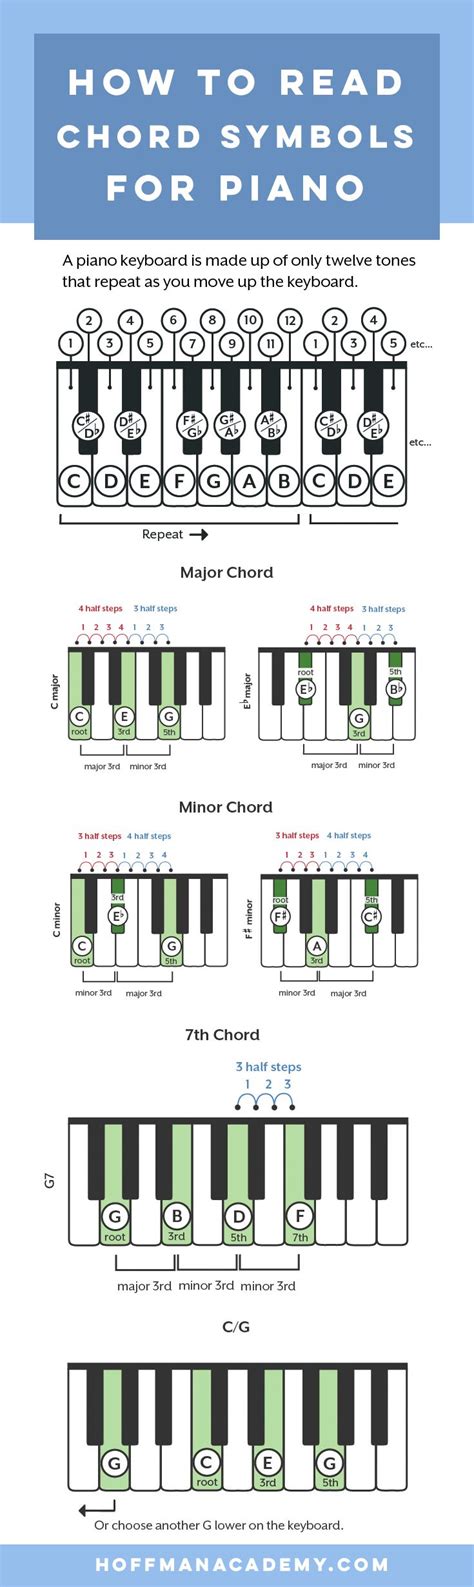 How To Read And Play Piano Chords Piano Chords Piano Music Piano